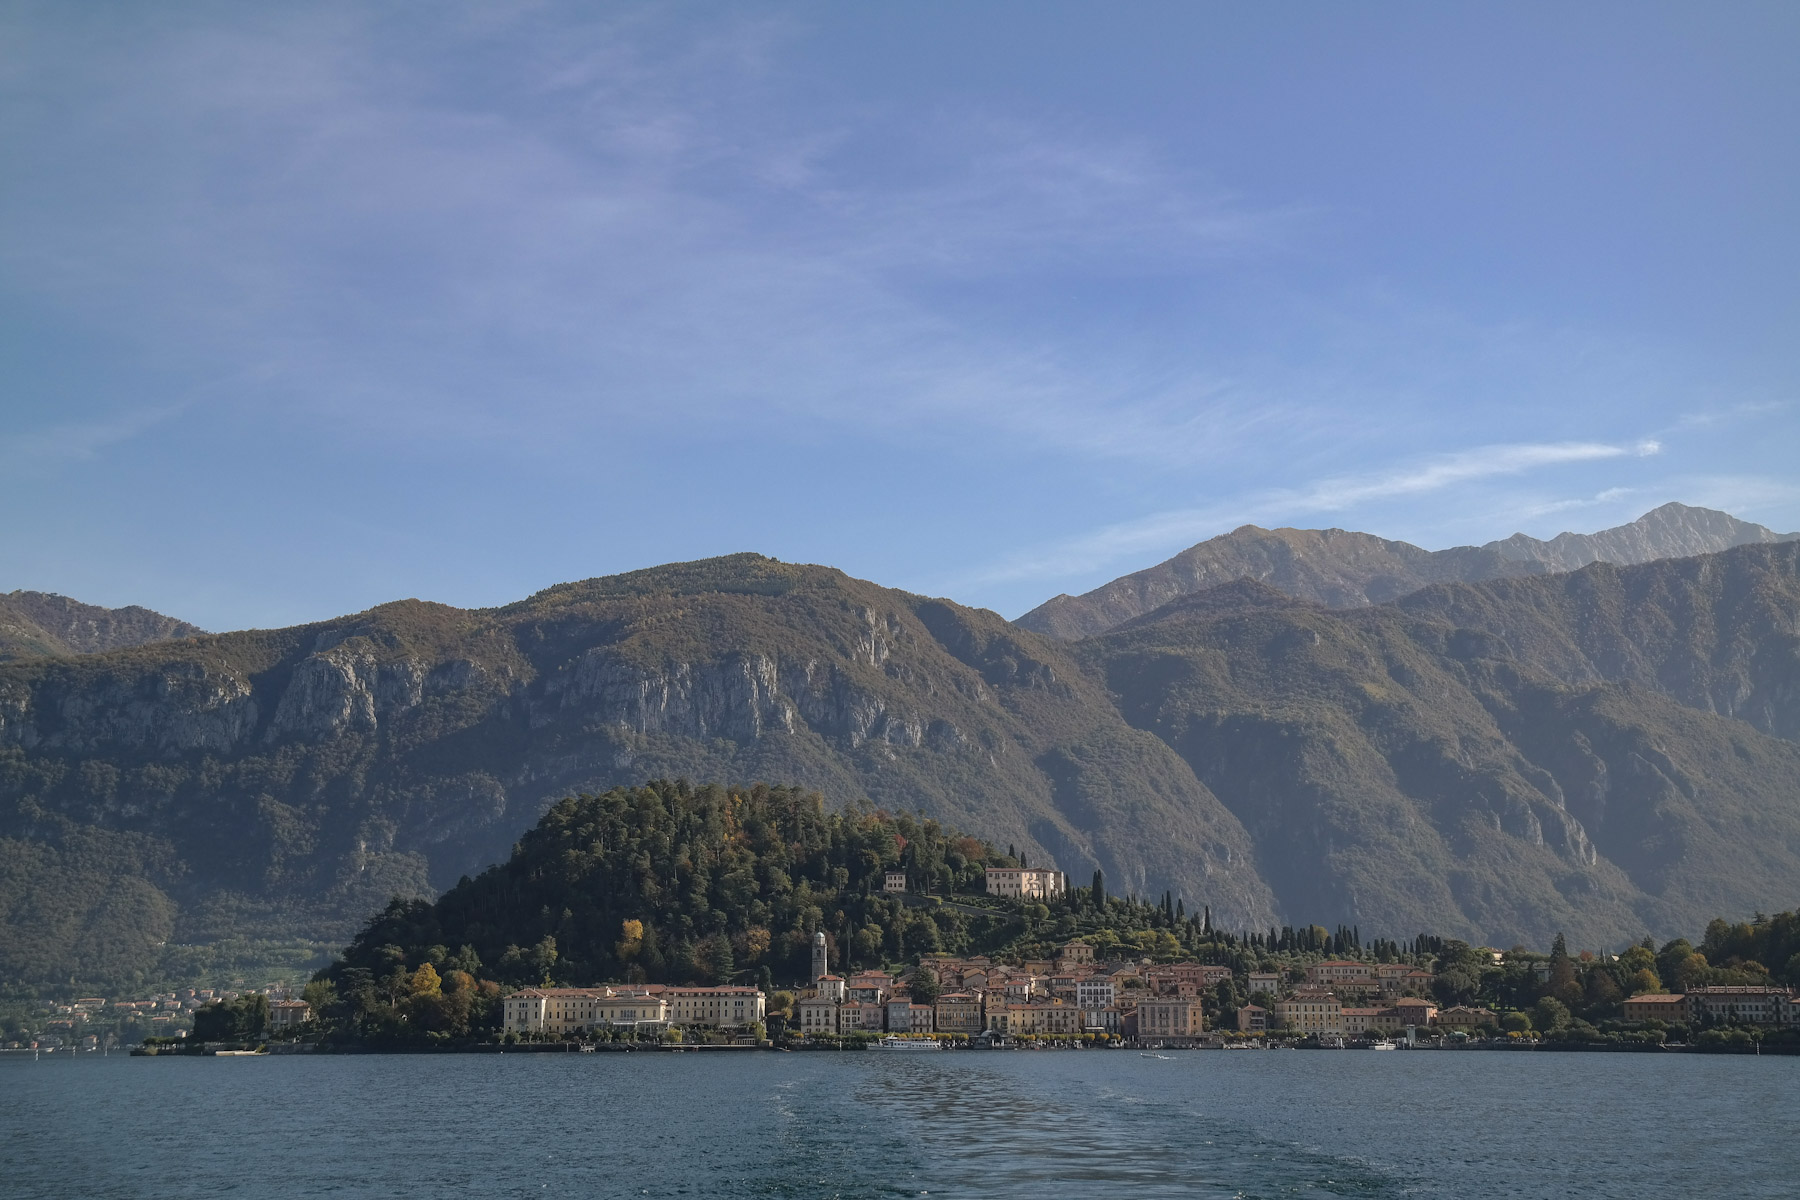 Panoramic View of Bellagio from the Ferry, Lake Como, Italy